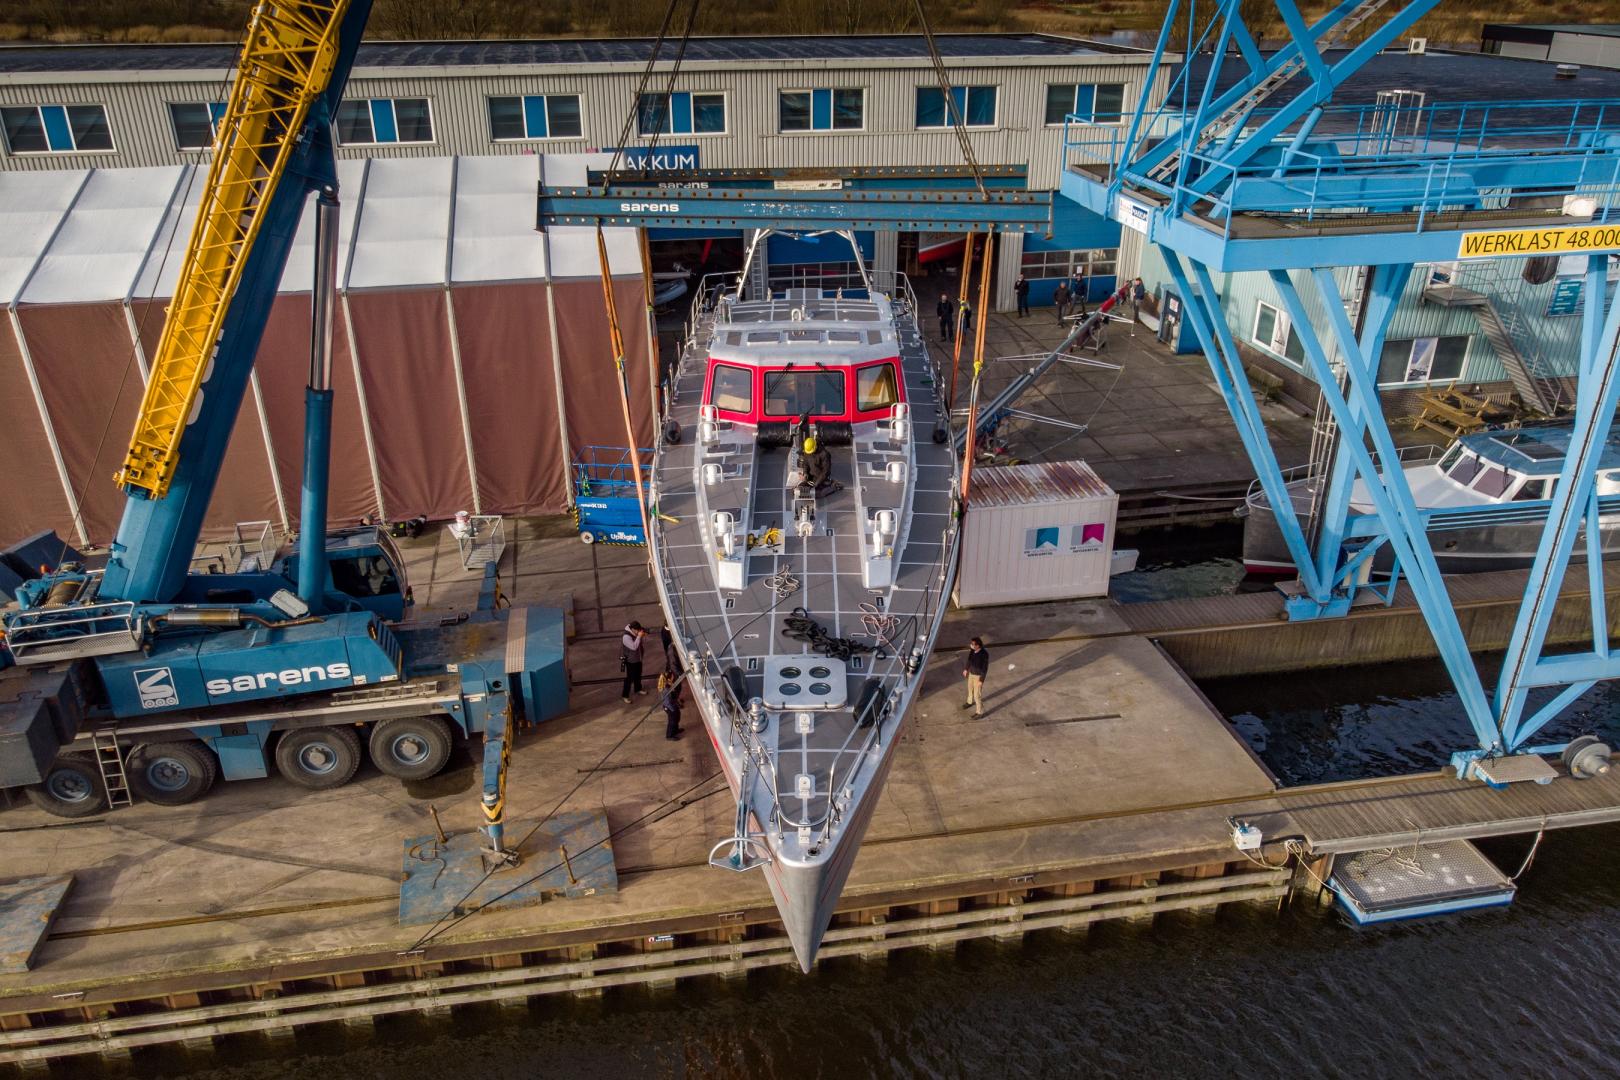 Expedition vessel Pelagic 77 was launched at KM Yachtbuilders